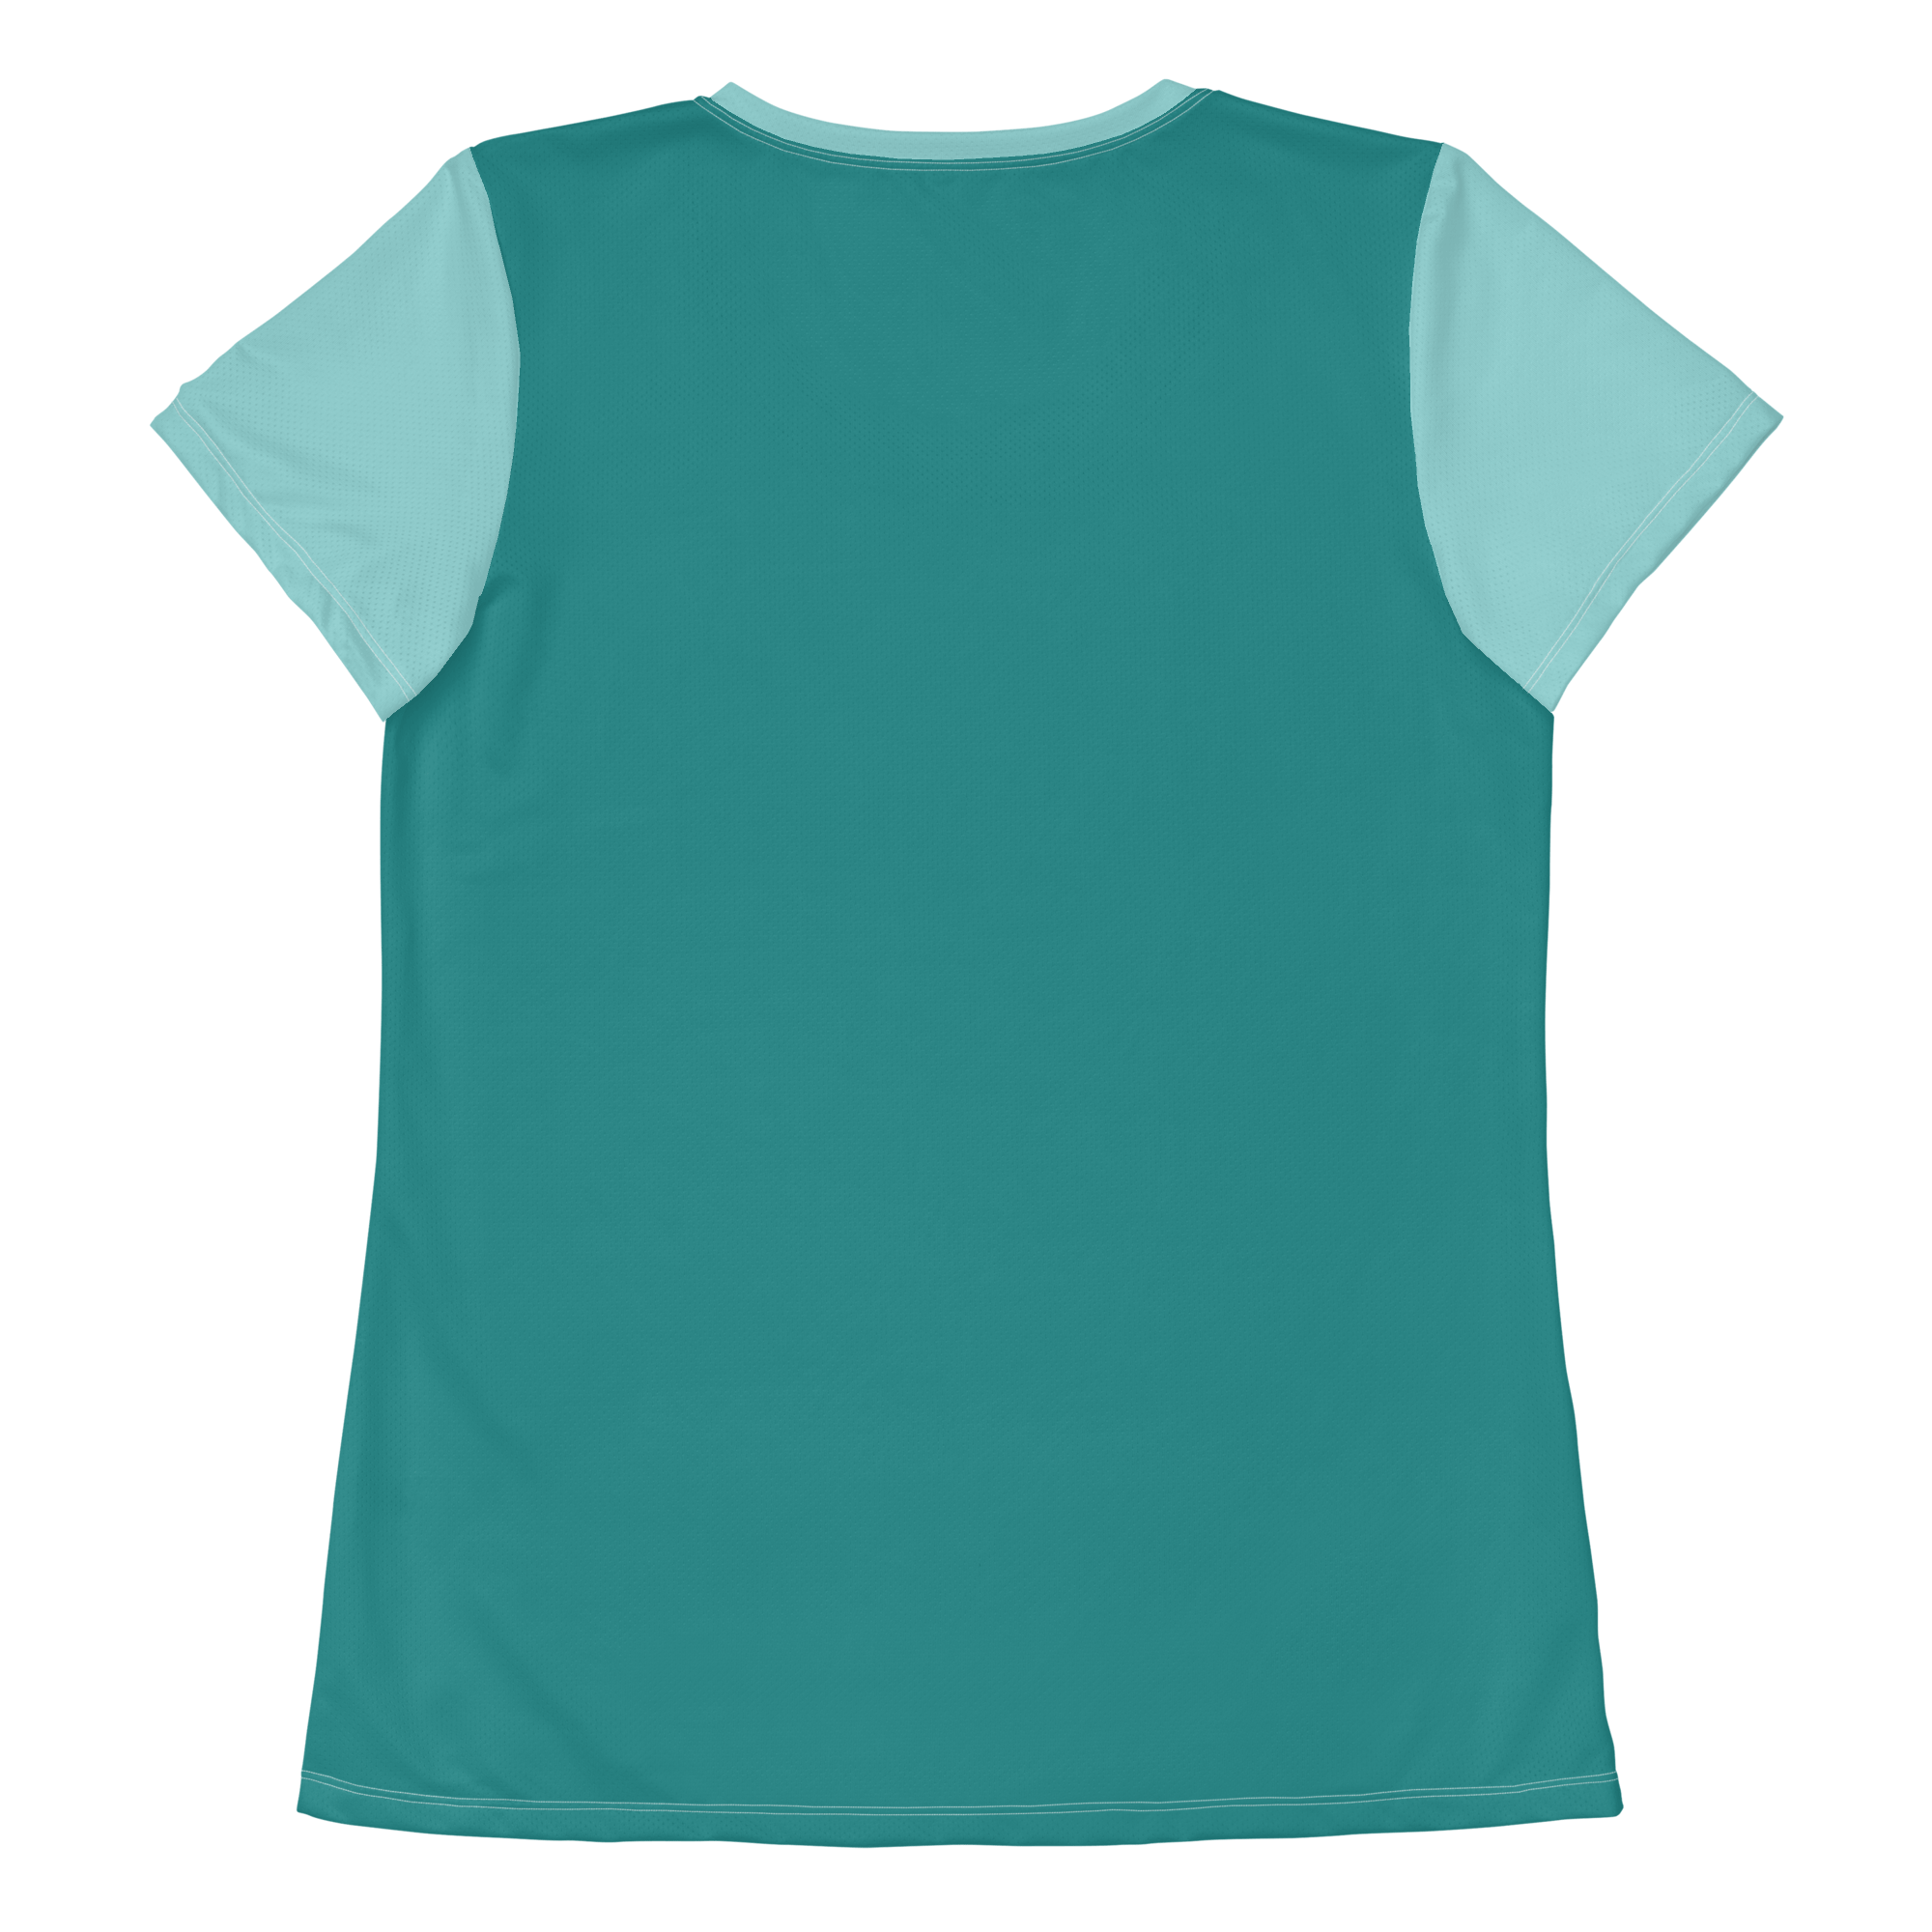 Happiness Multiplier Women's Athletic Shirt in Cool Crop Tops Jolly & Goode